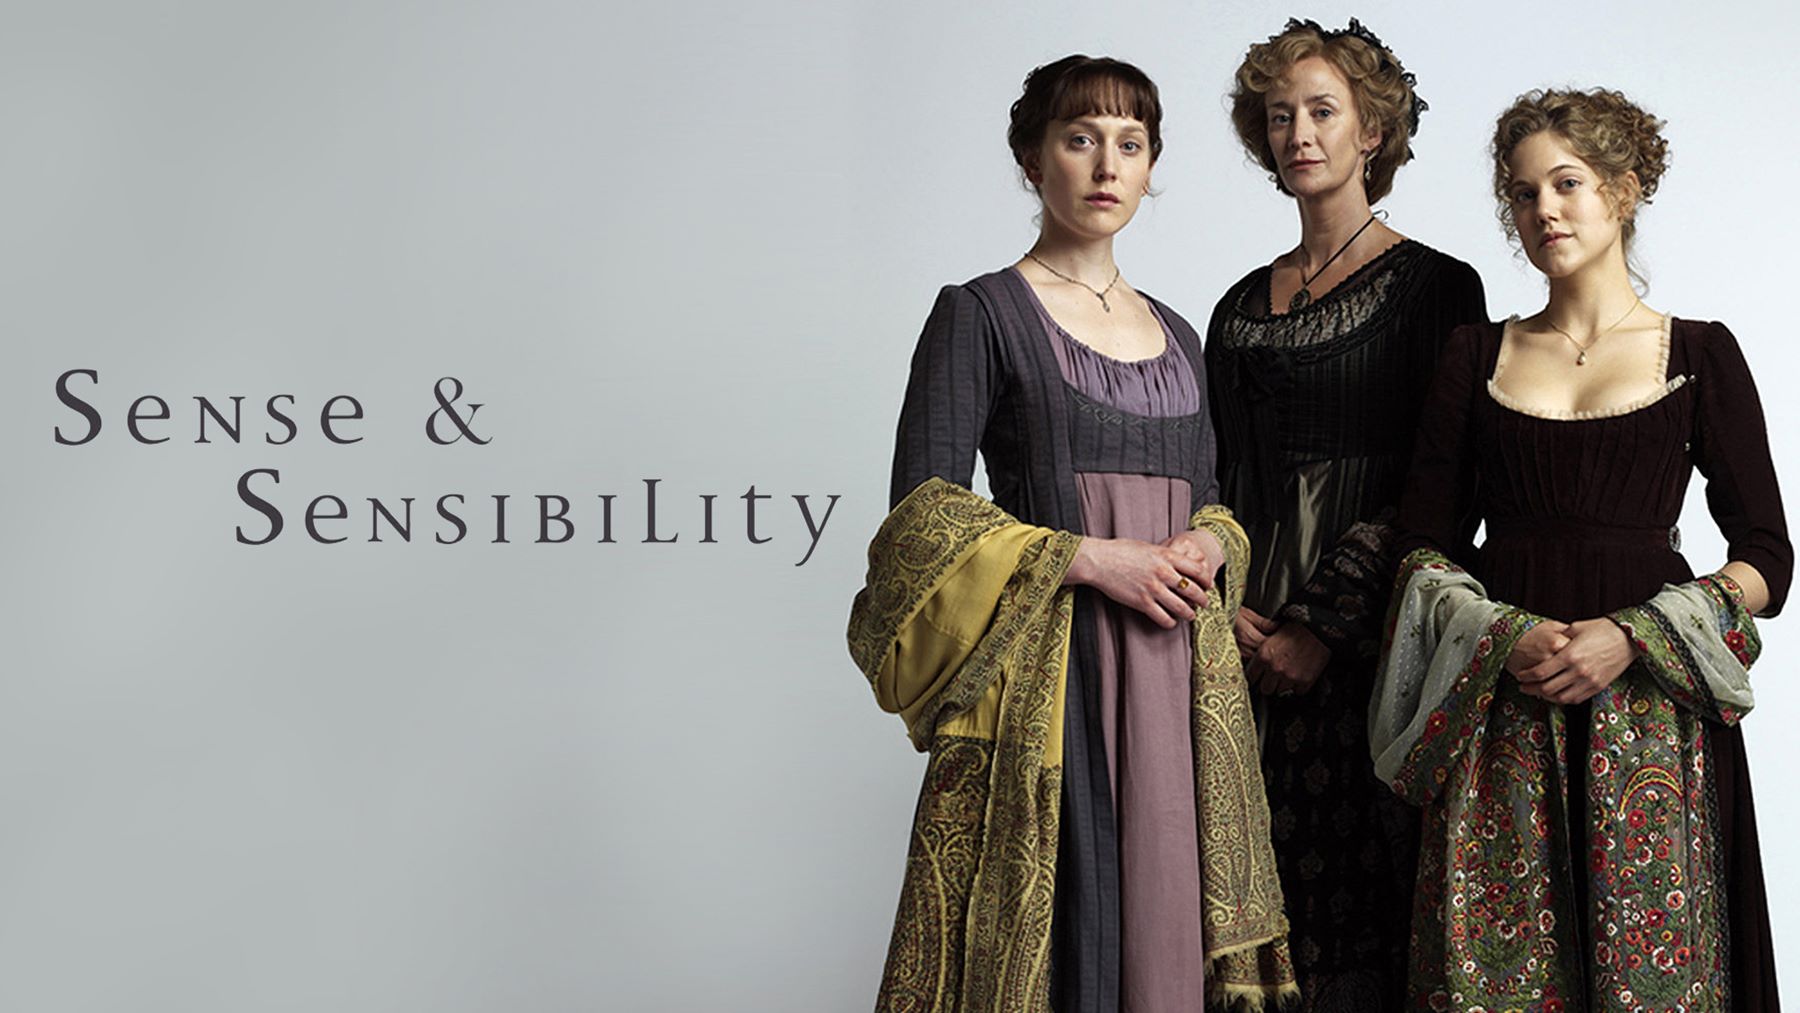 How To Watch Sense And Sensibility